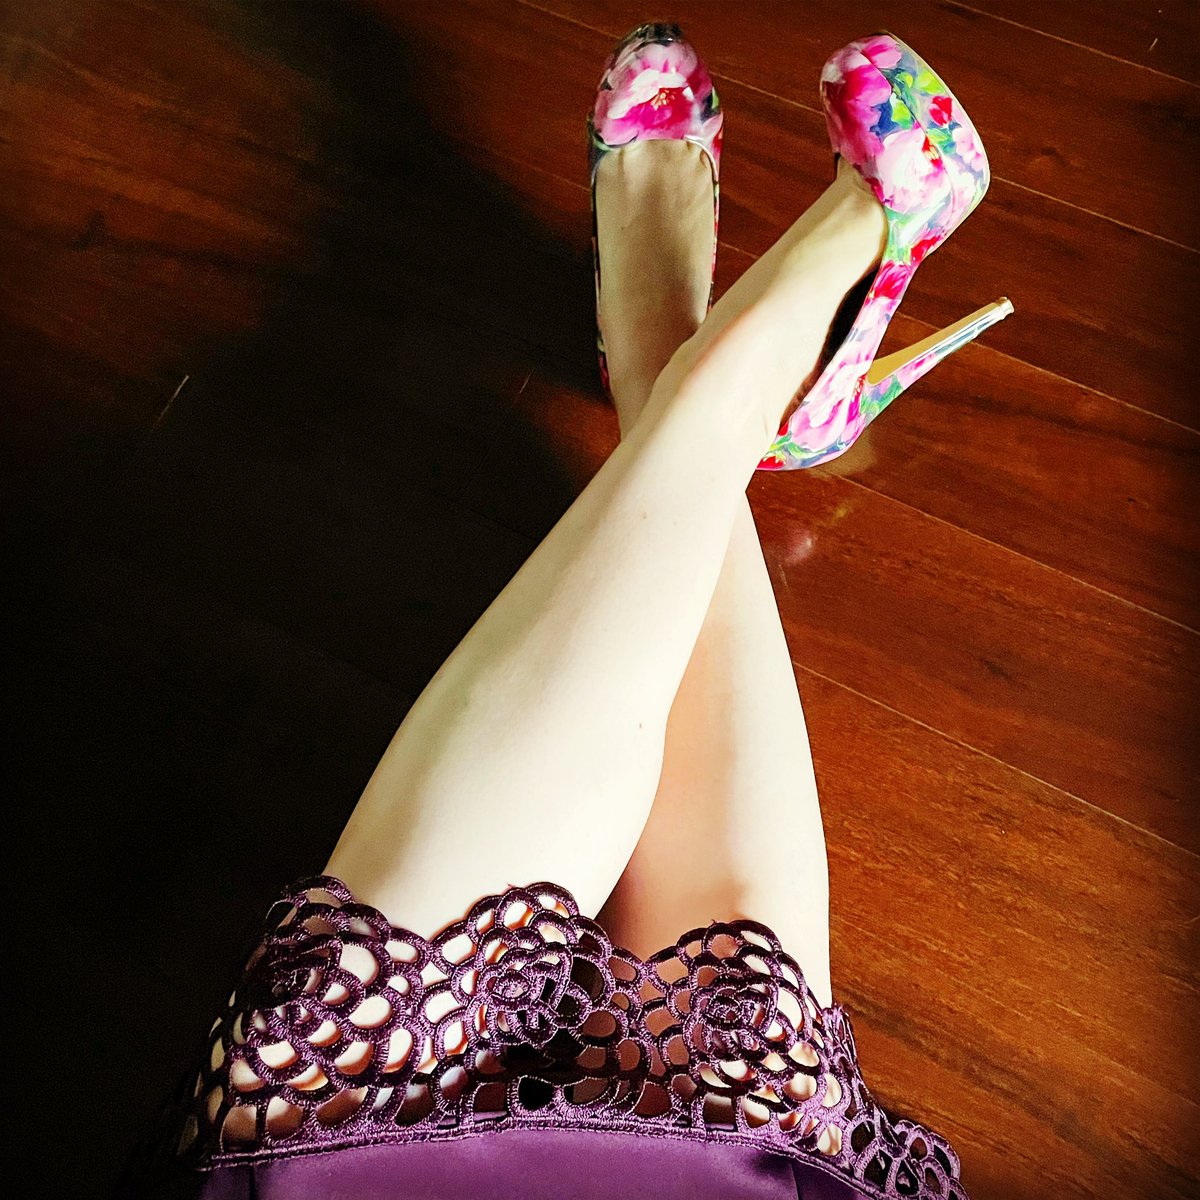 For the #firstdayoffall I broke out this beautiful eggplant dress with rose lace detail and these bright @guess #flowershoes as #springtime starts to fade. #guessshoes #roseshoes #shoelove365 #shoes #shoelove #shoelover #heellove #heellover #highheels #heels #heelsofcourse